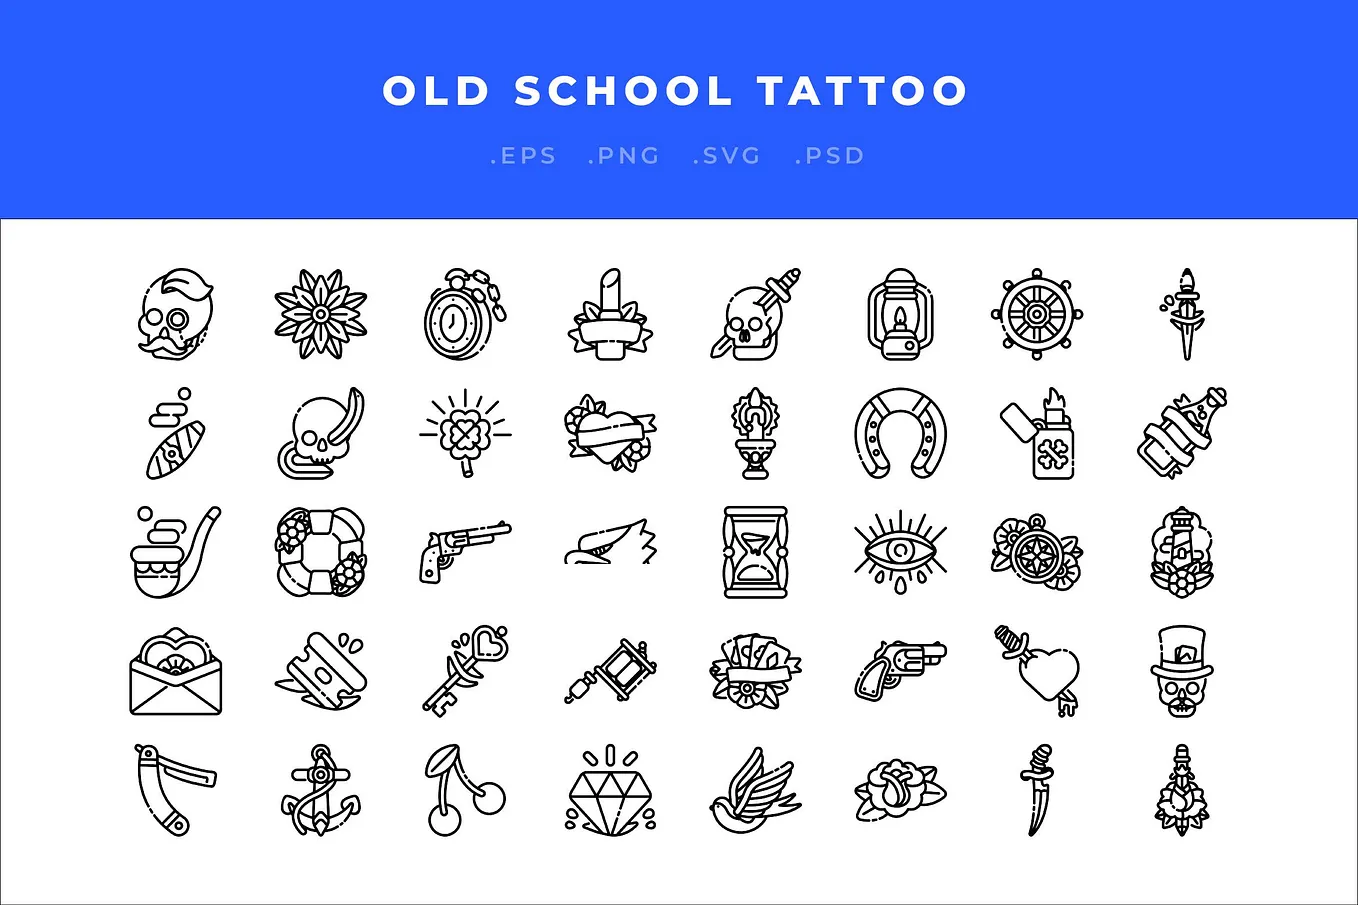 Old School Tattoo Icons Cover Image 1